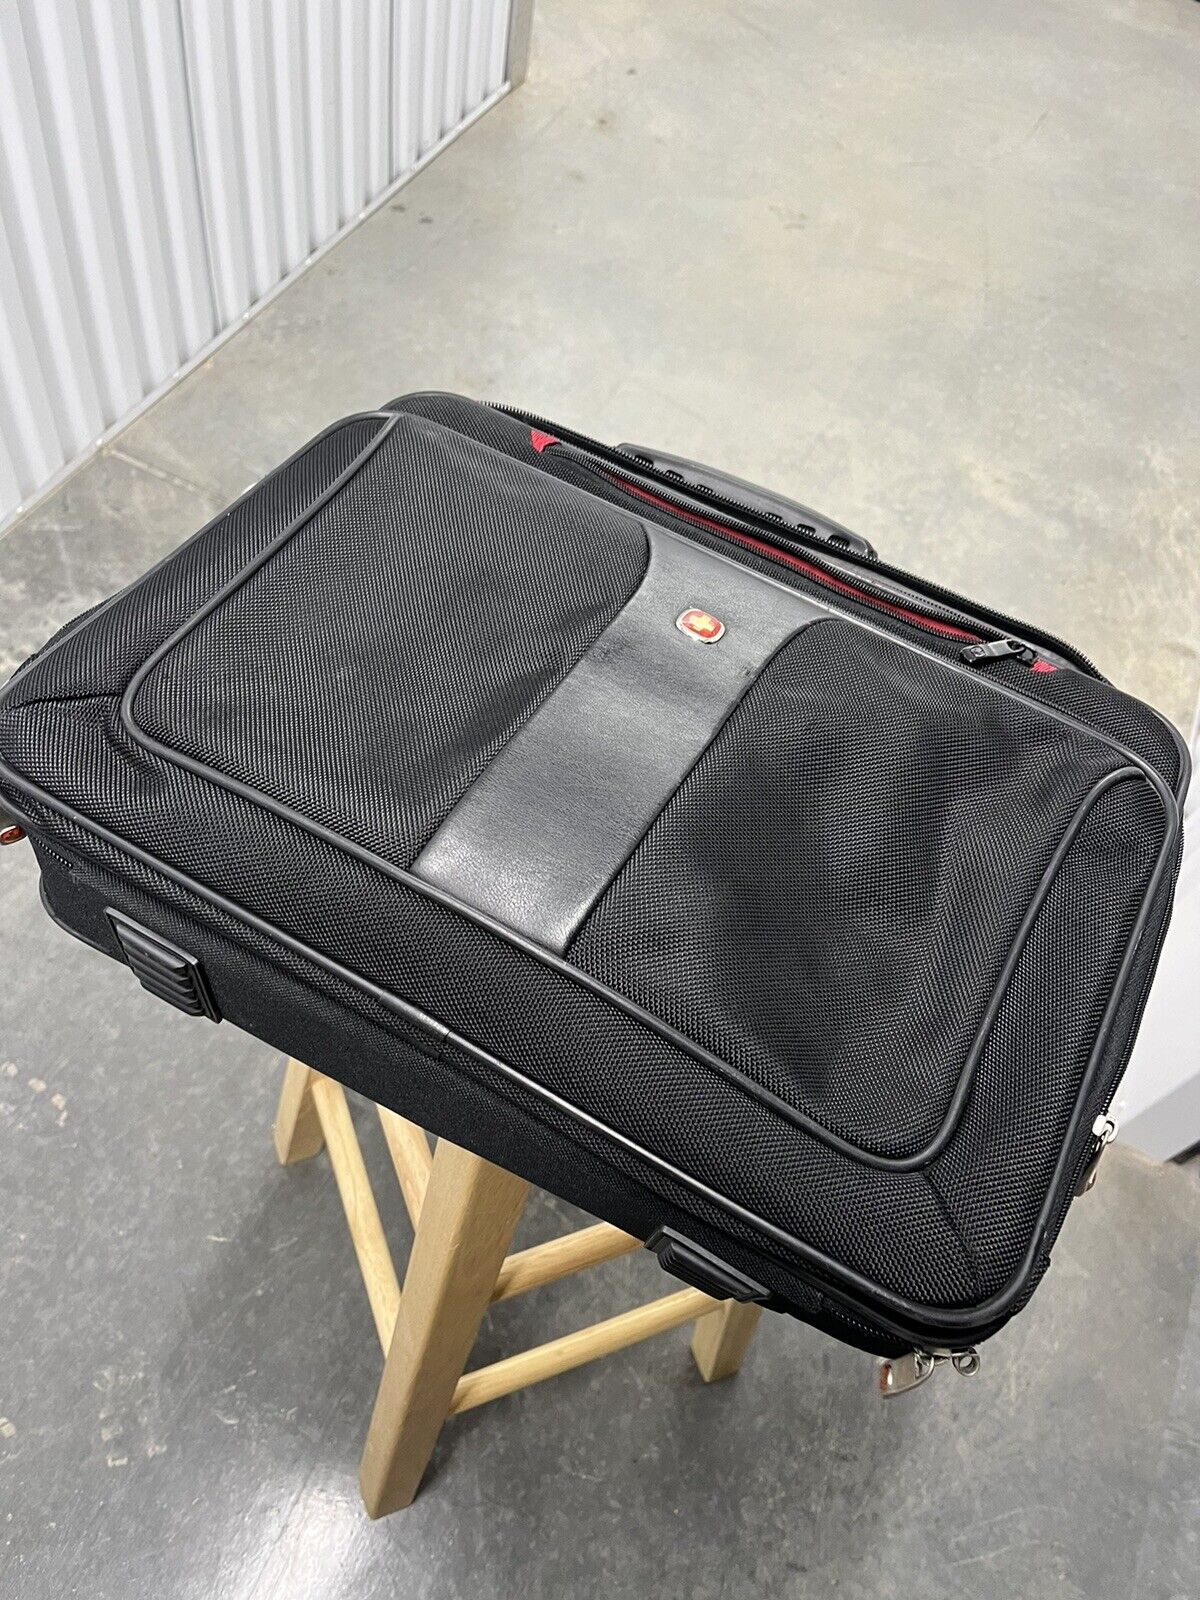 Wenger Swiss Army The Genuine Swiss Computer Carry Case Briefcase Excellent